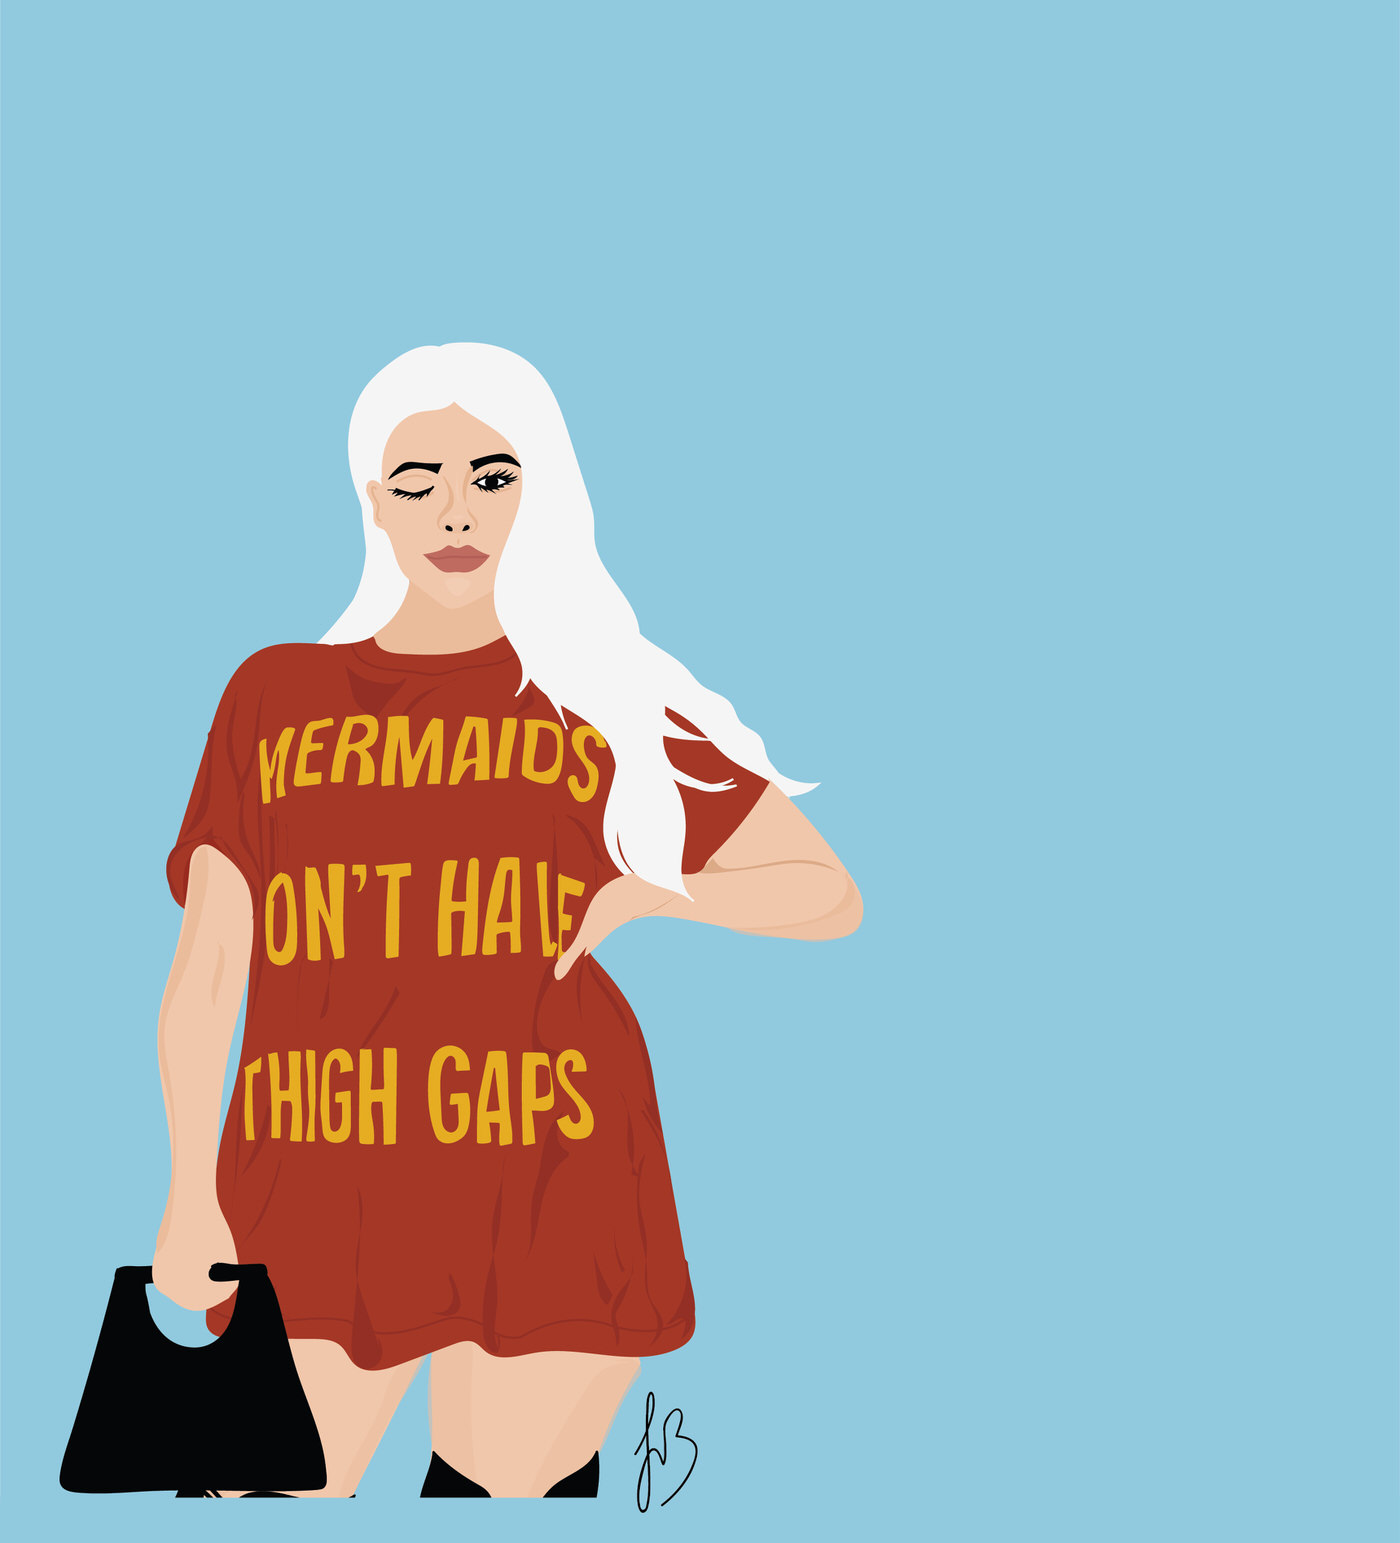 Yellow Co Illustraions Mermaids Don't Have Thigh Gaps By Jolie Brownell copy.jpg